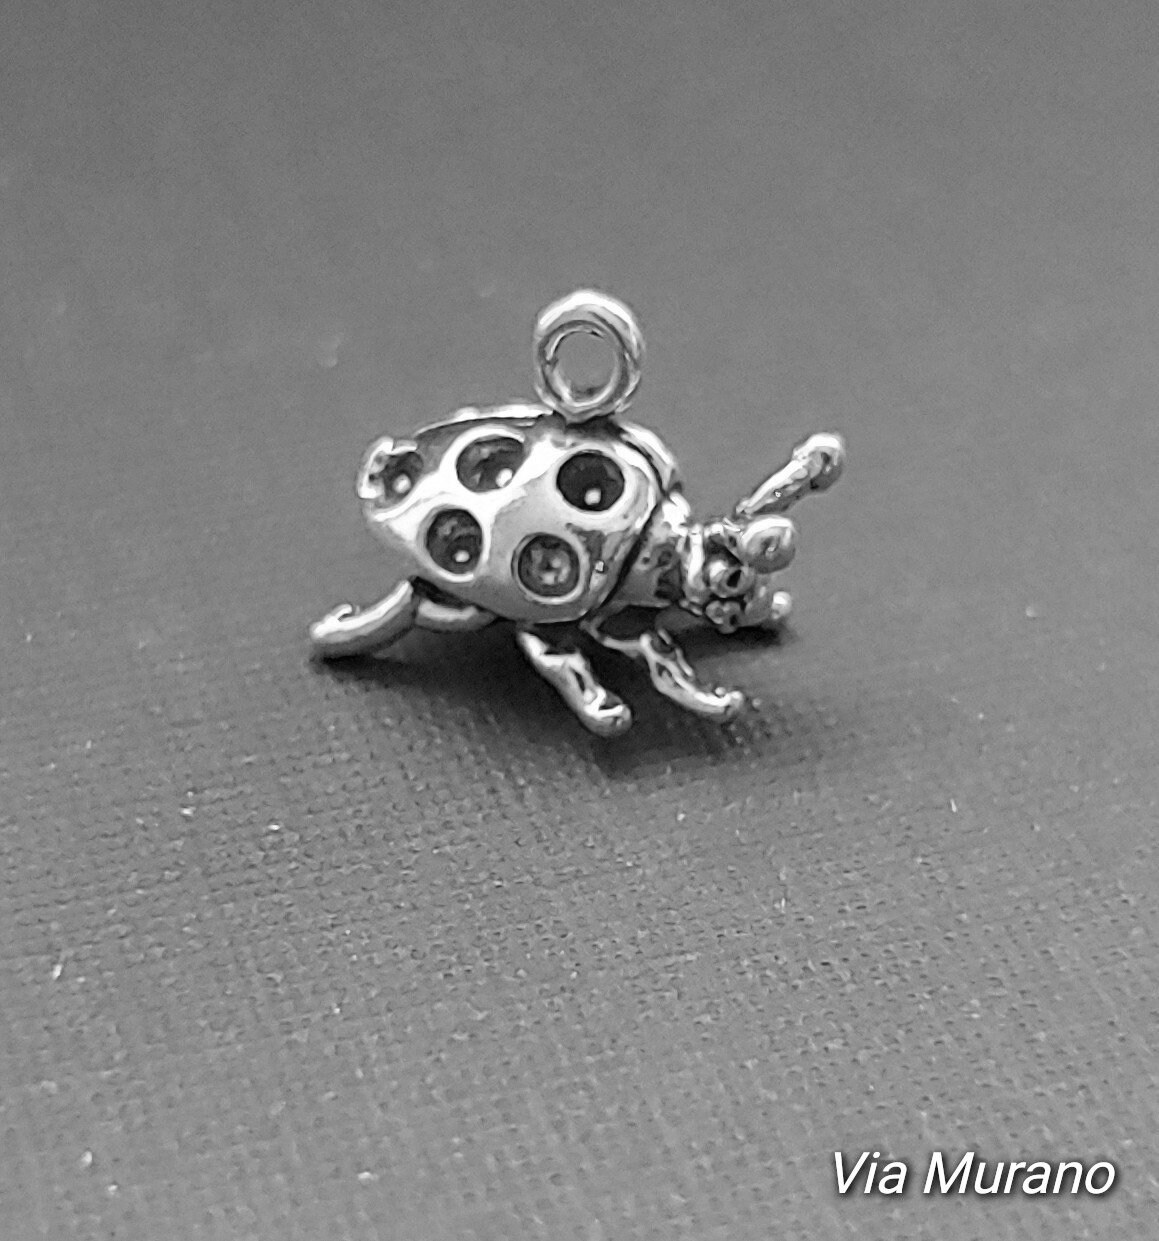 50-Pcs. Silver Pig Cute Animal Charms Pendants Ear Drops Q1187 - Jewelry  Making DIY Crafting Charm Beads for Bracelets